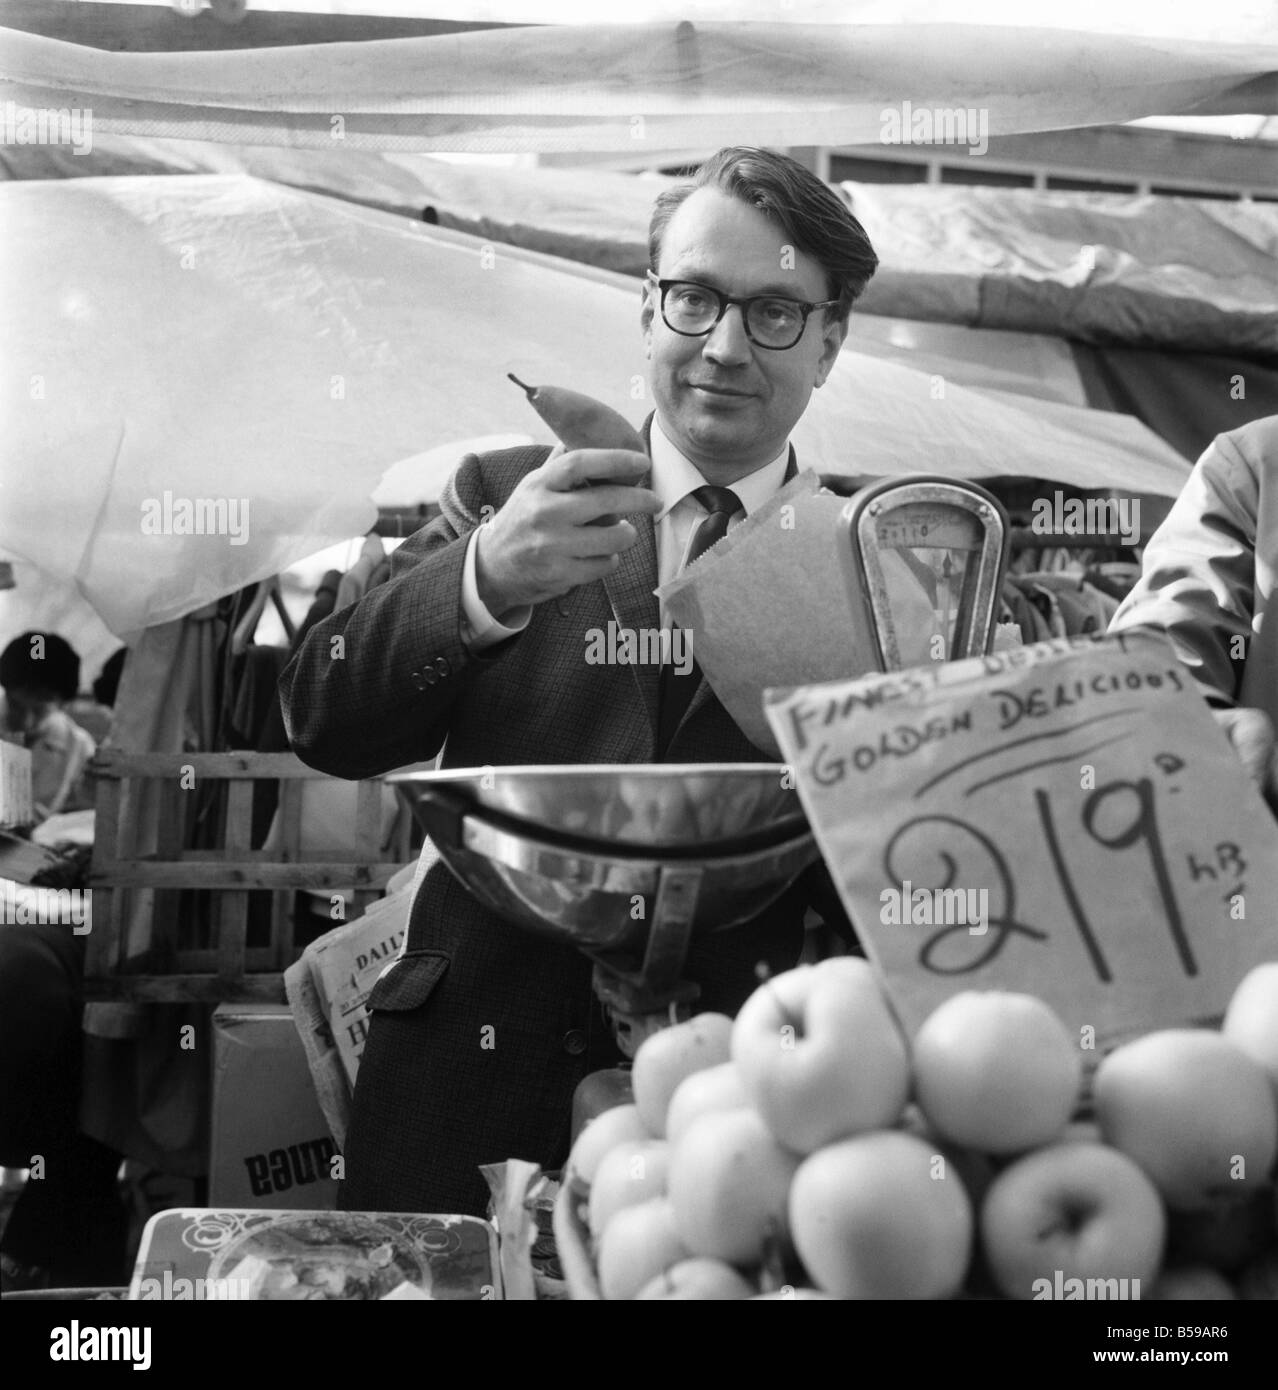 Politics: Elections: The Newcastle-under-Lyne by-election: The labour candidate, Golding, is seen talking to stall-holders in the market, serving fruit and portrait (wears glasses). October 1969 Z10368-002 Stock Photo